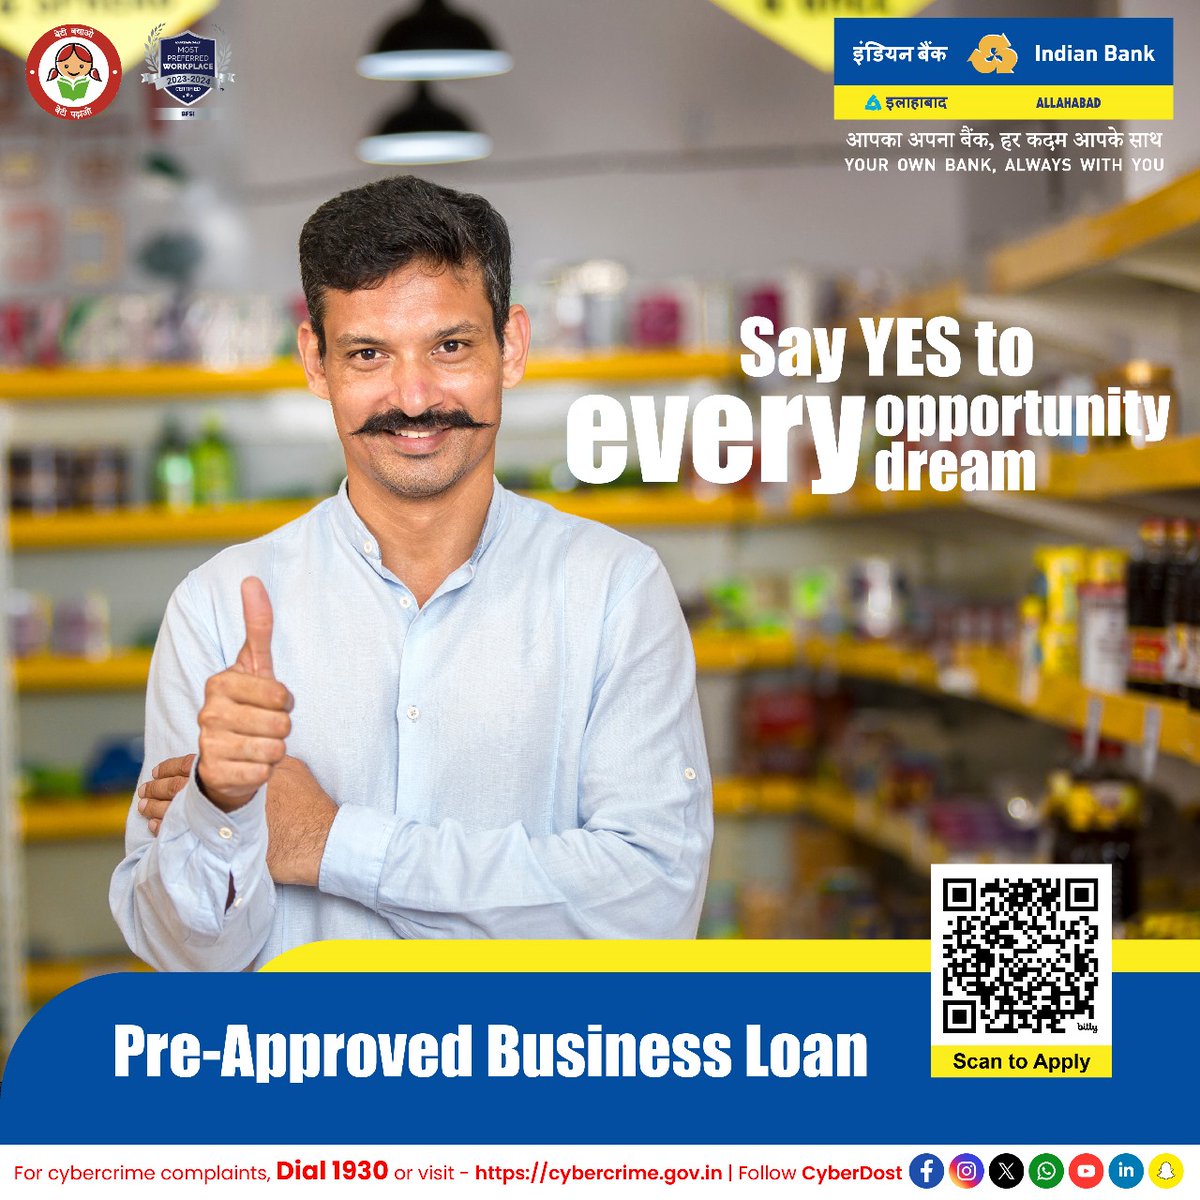 Get ready to supercharge your business with our Pre-Approved Business Loan! Get your hands on the funds you need with a few clicks and capitalize on every opportunity to make your dreams come true. Know more: bit.ly/IB_PABL @DFS_India